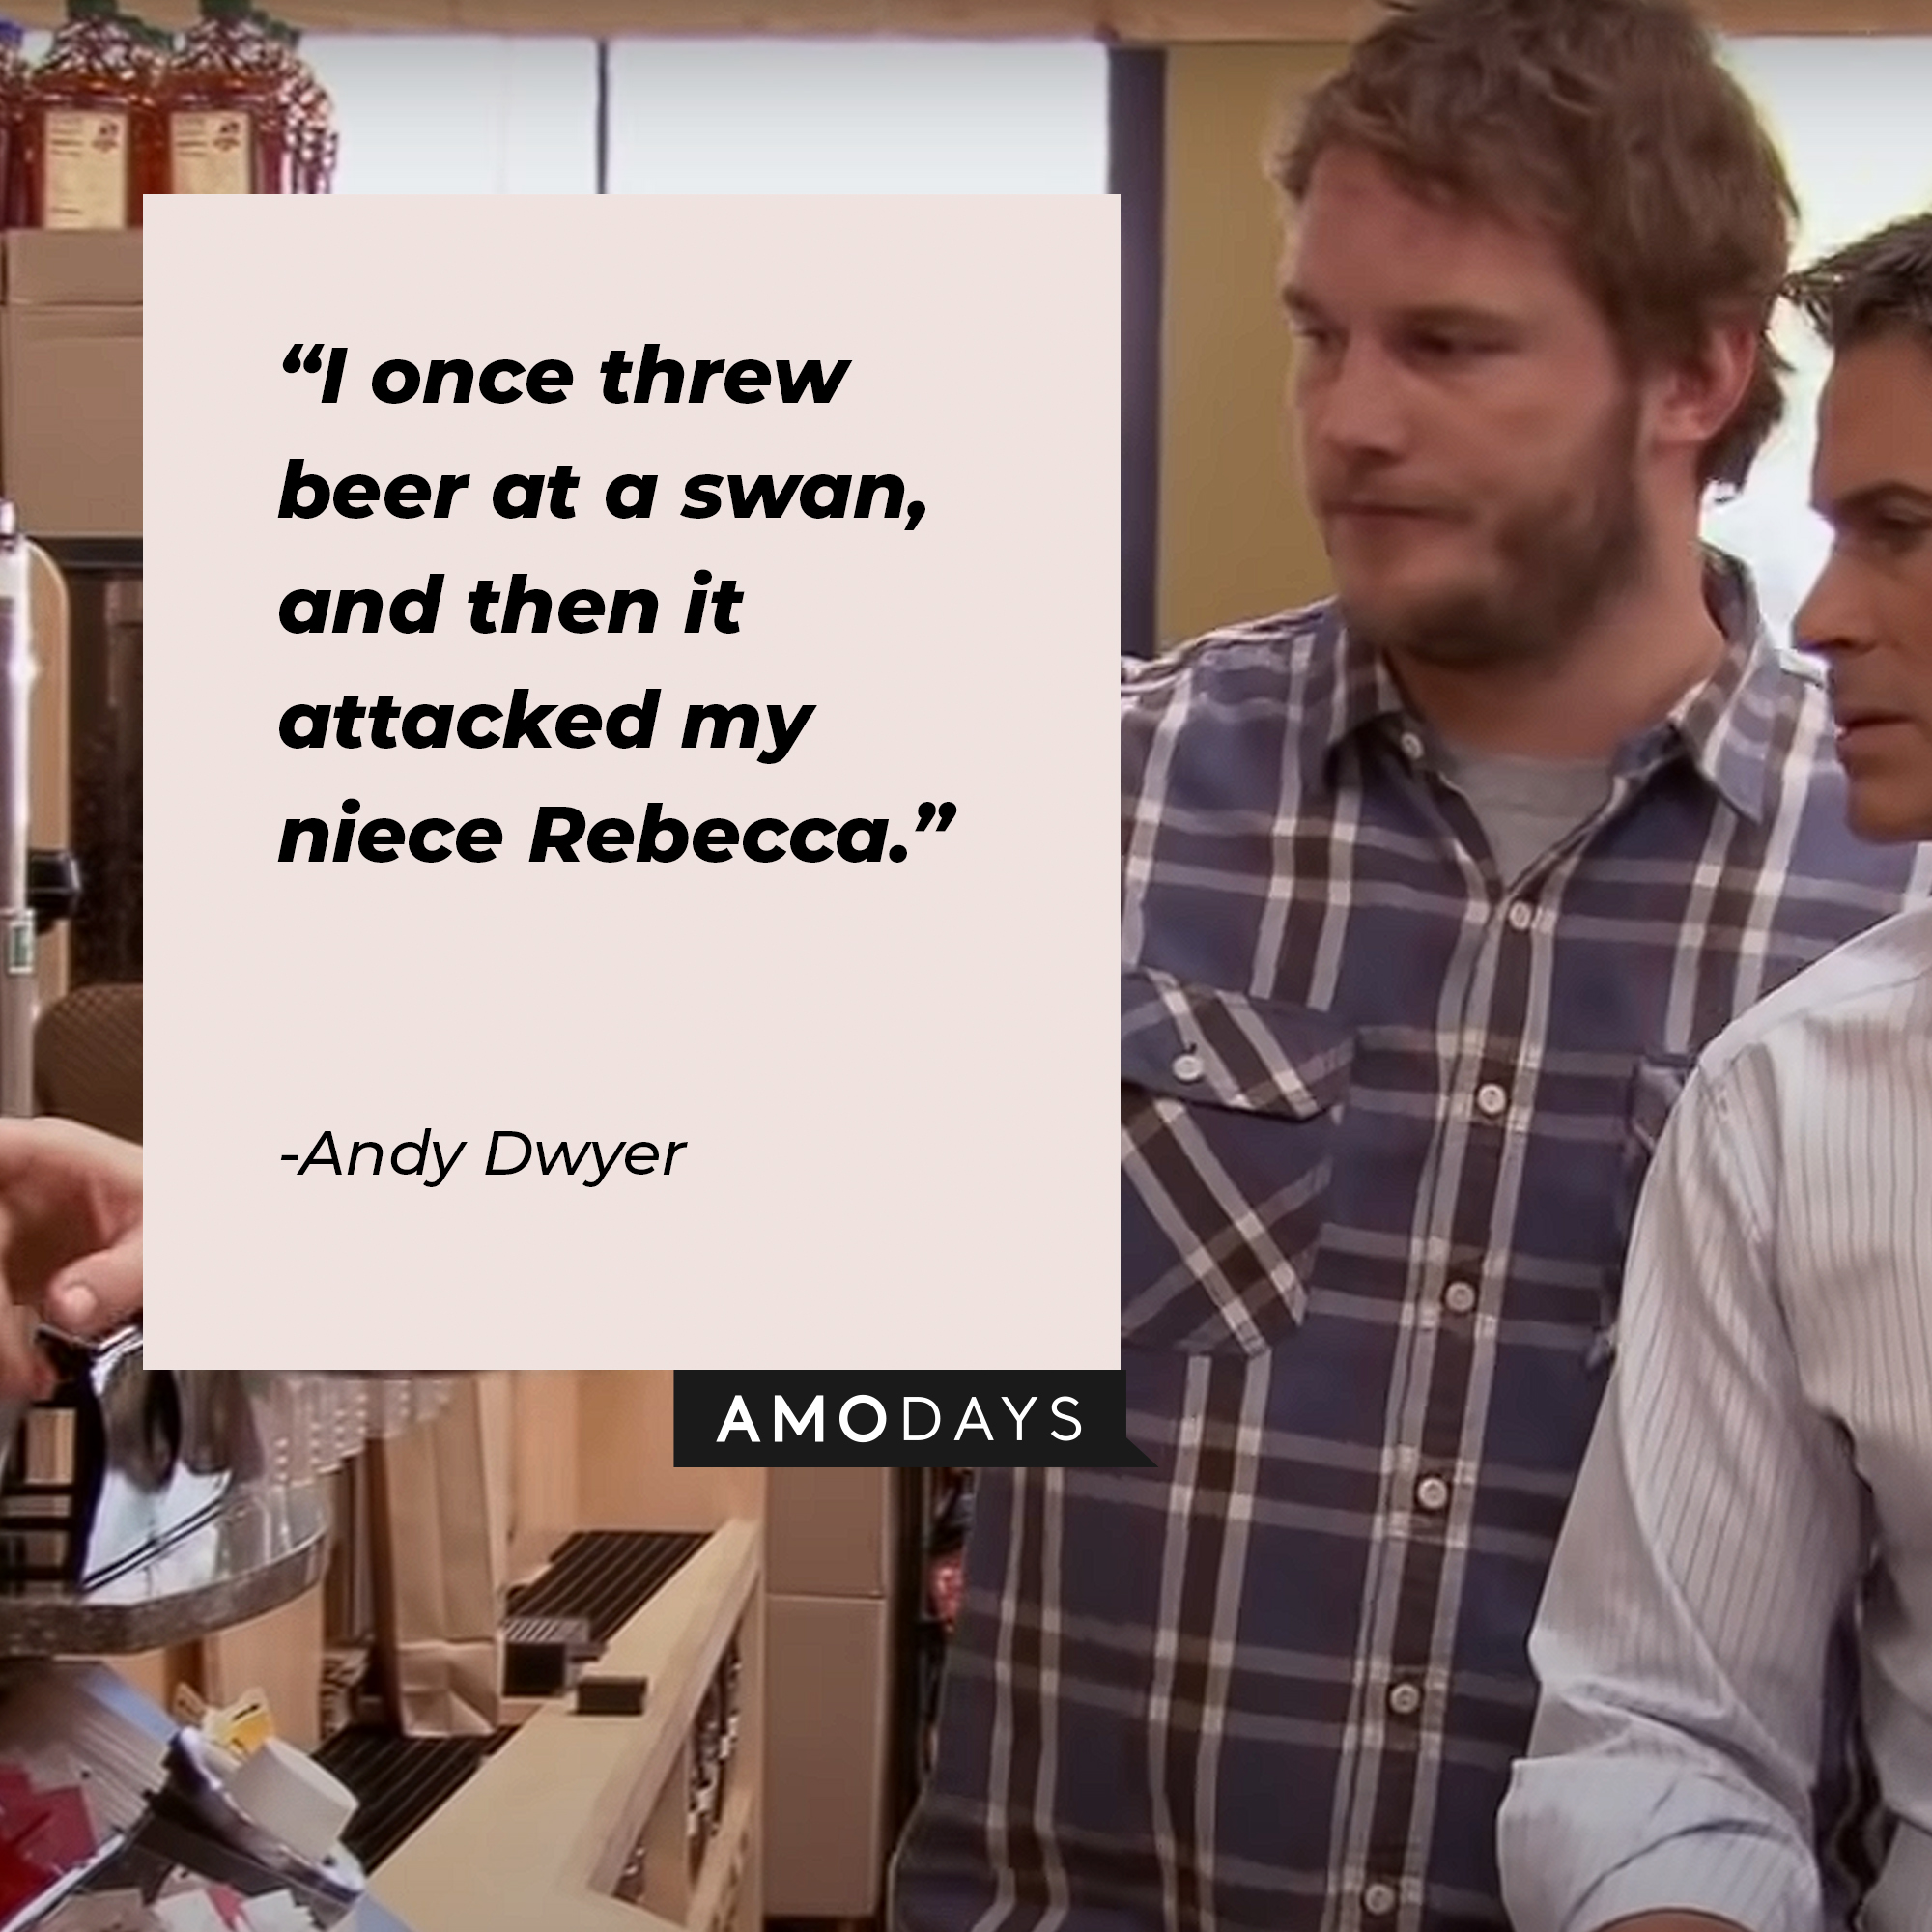 A picture of Andy Dwyer with his quote: "I once threw beer at a swan, and then it attacked my niece Rebecca." | Source: youtube.com/ParksandRecreation